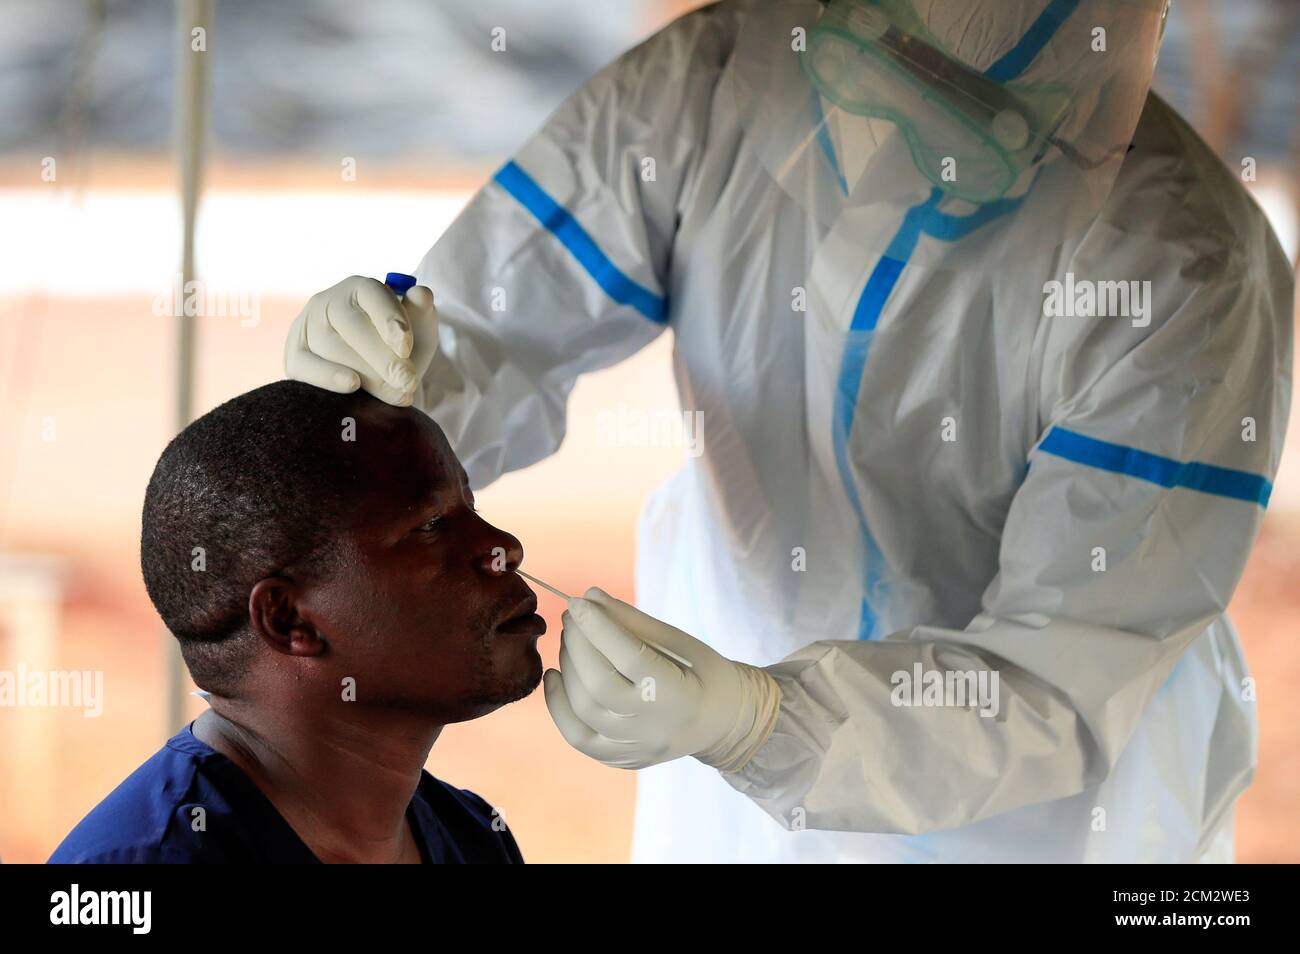 A man is tested by a healthcare worker during a nationwide lockdown to help curb the spread of the coronavirus disease (COVID-19), at a mass screening centre, in Harare, Zimbabwe April 30, 2020. REUTERS/Philimon Bulawayo Stock Photo